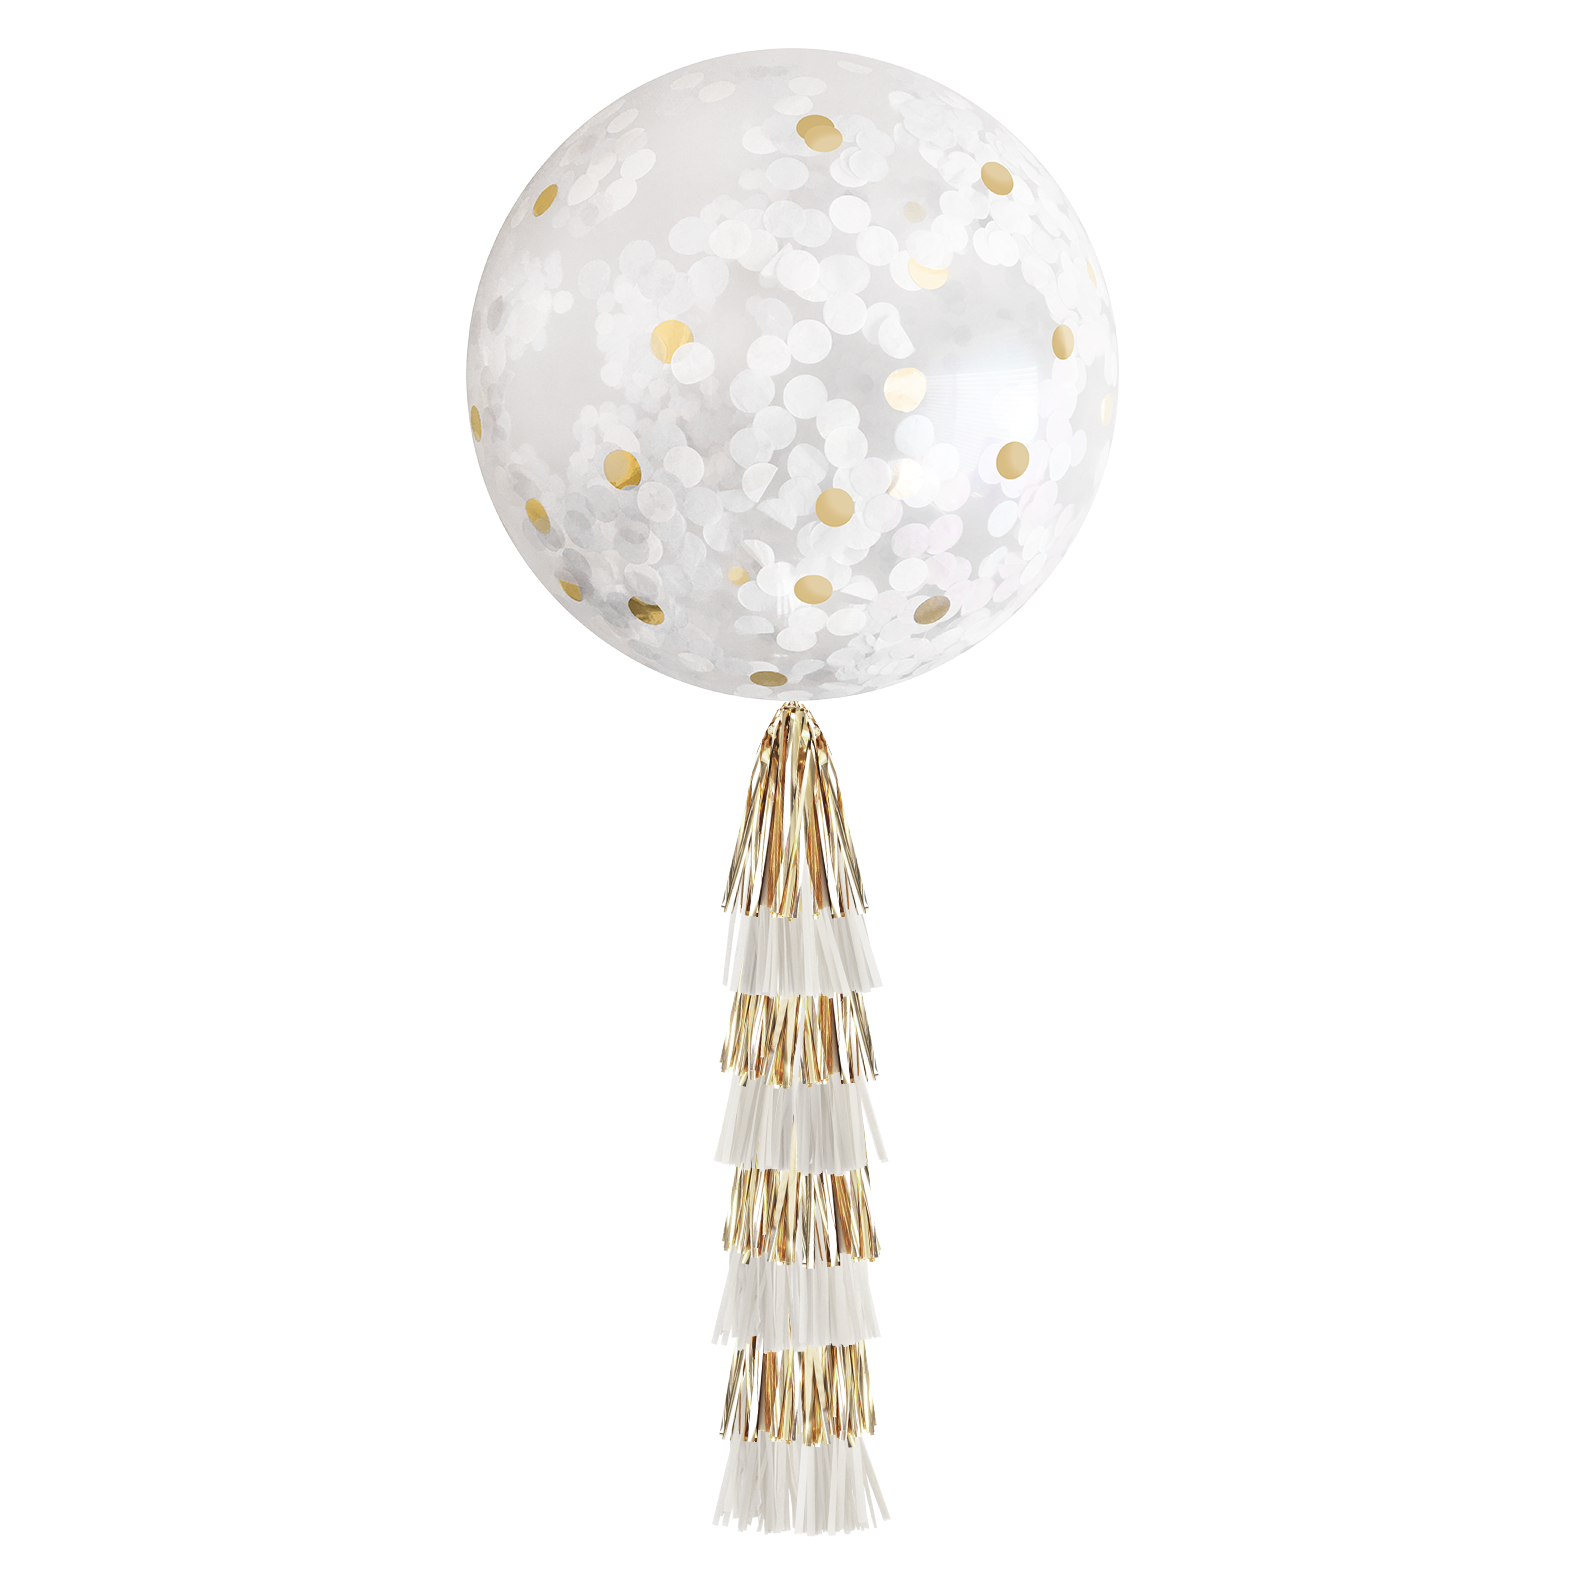 Giant Balloon with DIY Tassels - White & Gold 